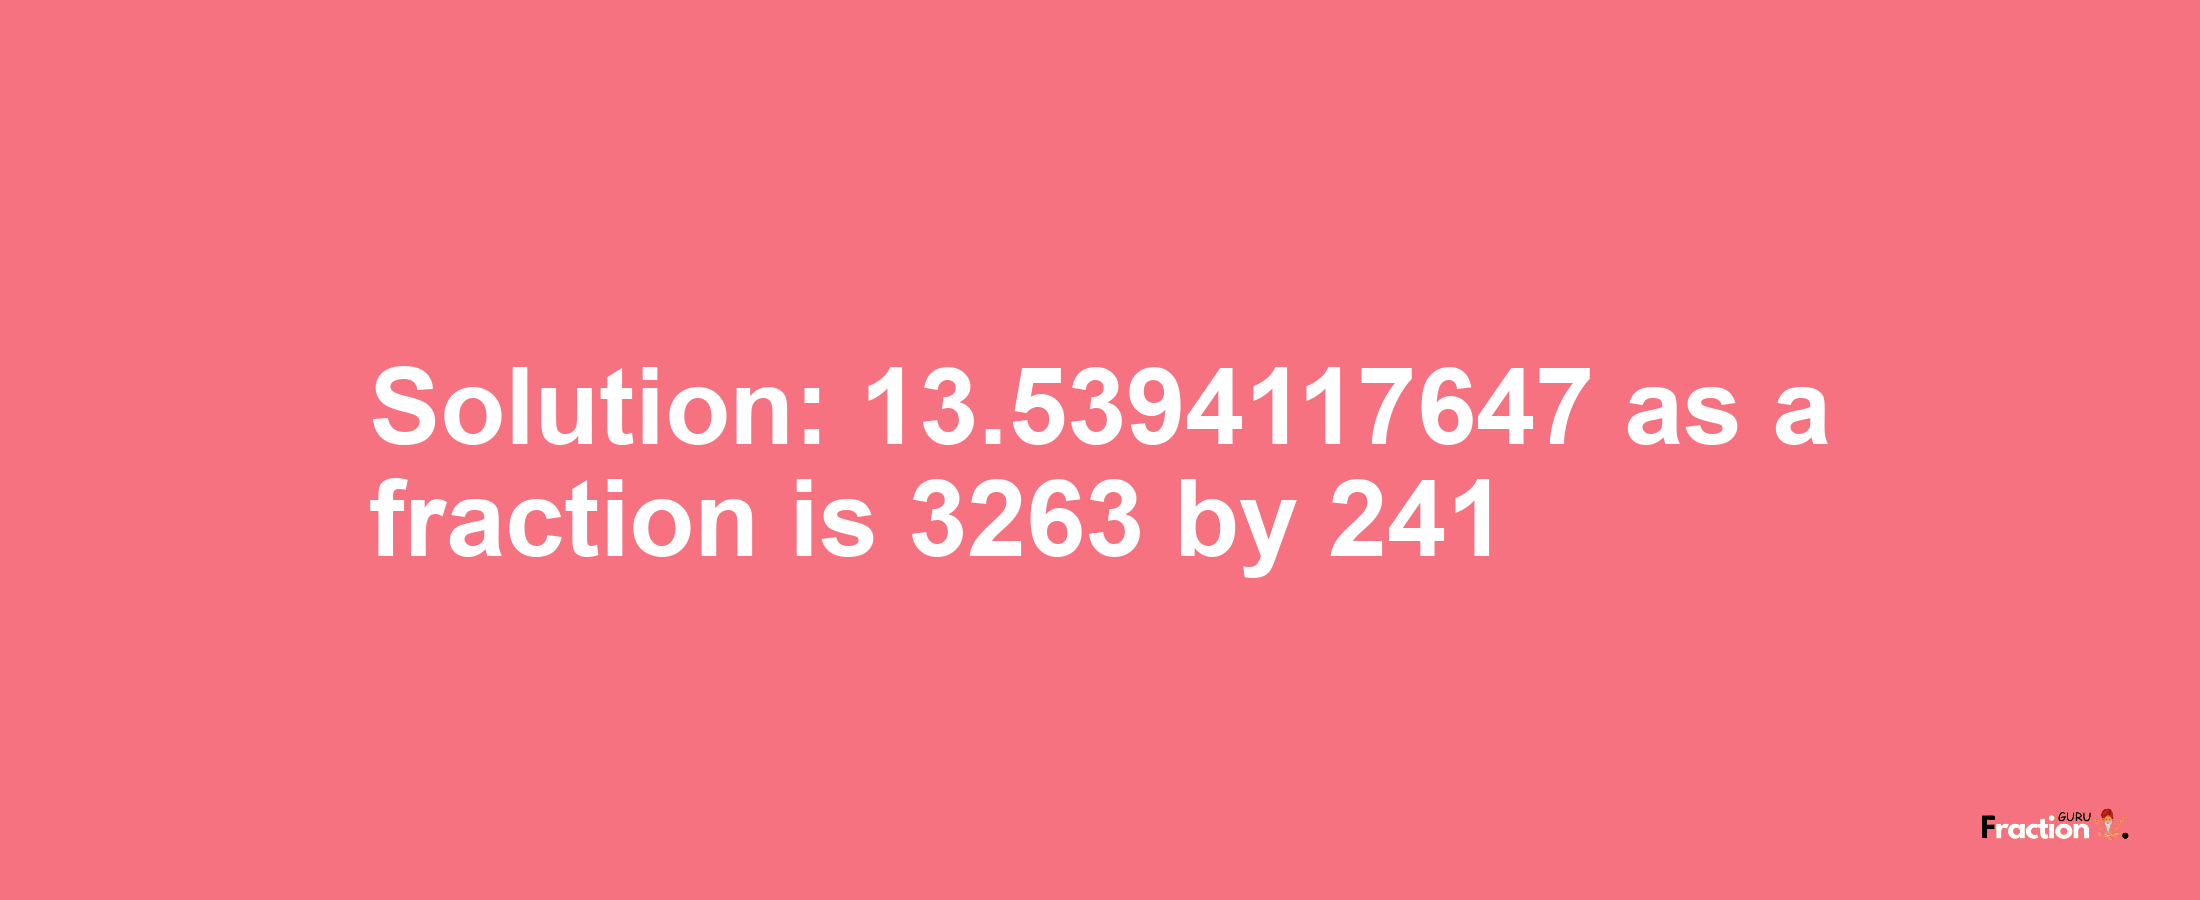 Solution:13.5394117647 as a fraction is 3263/241